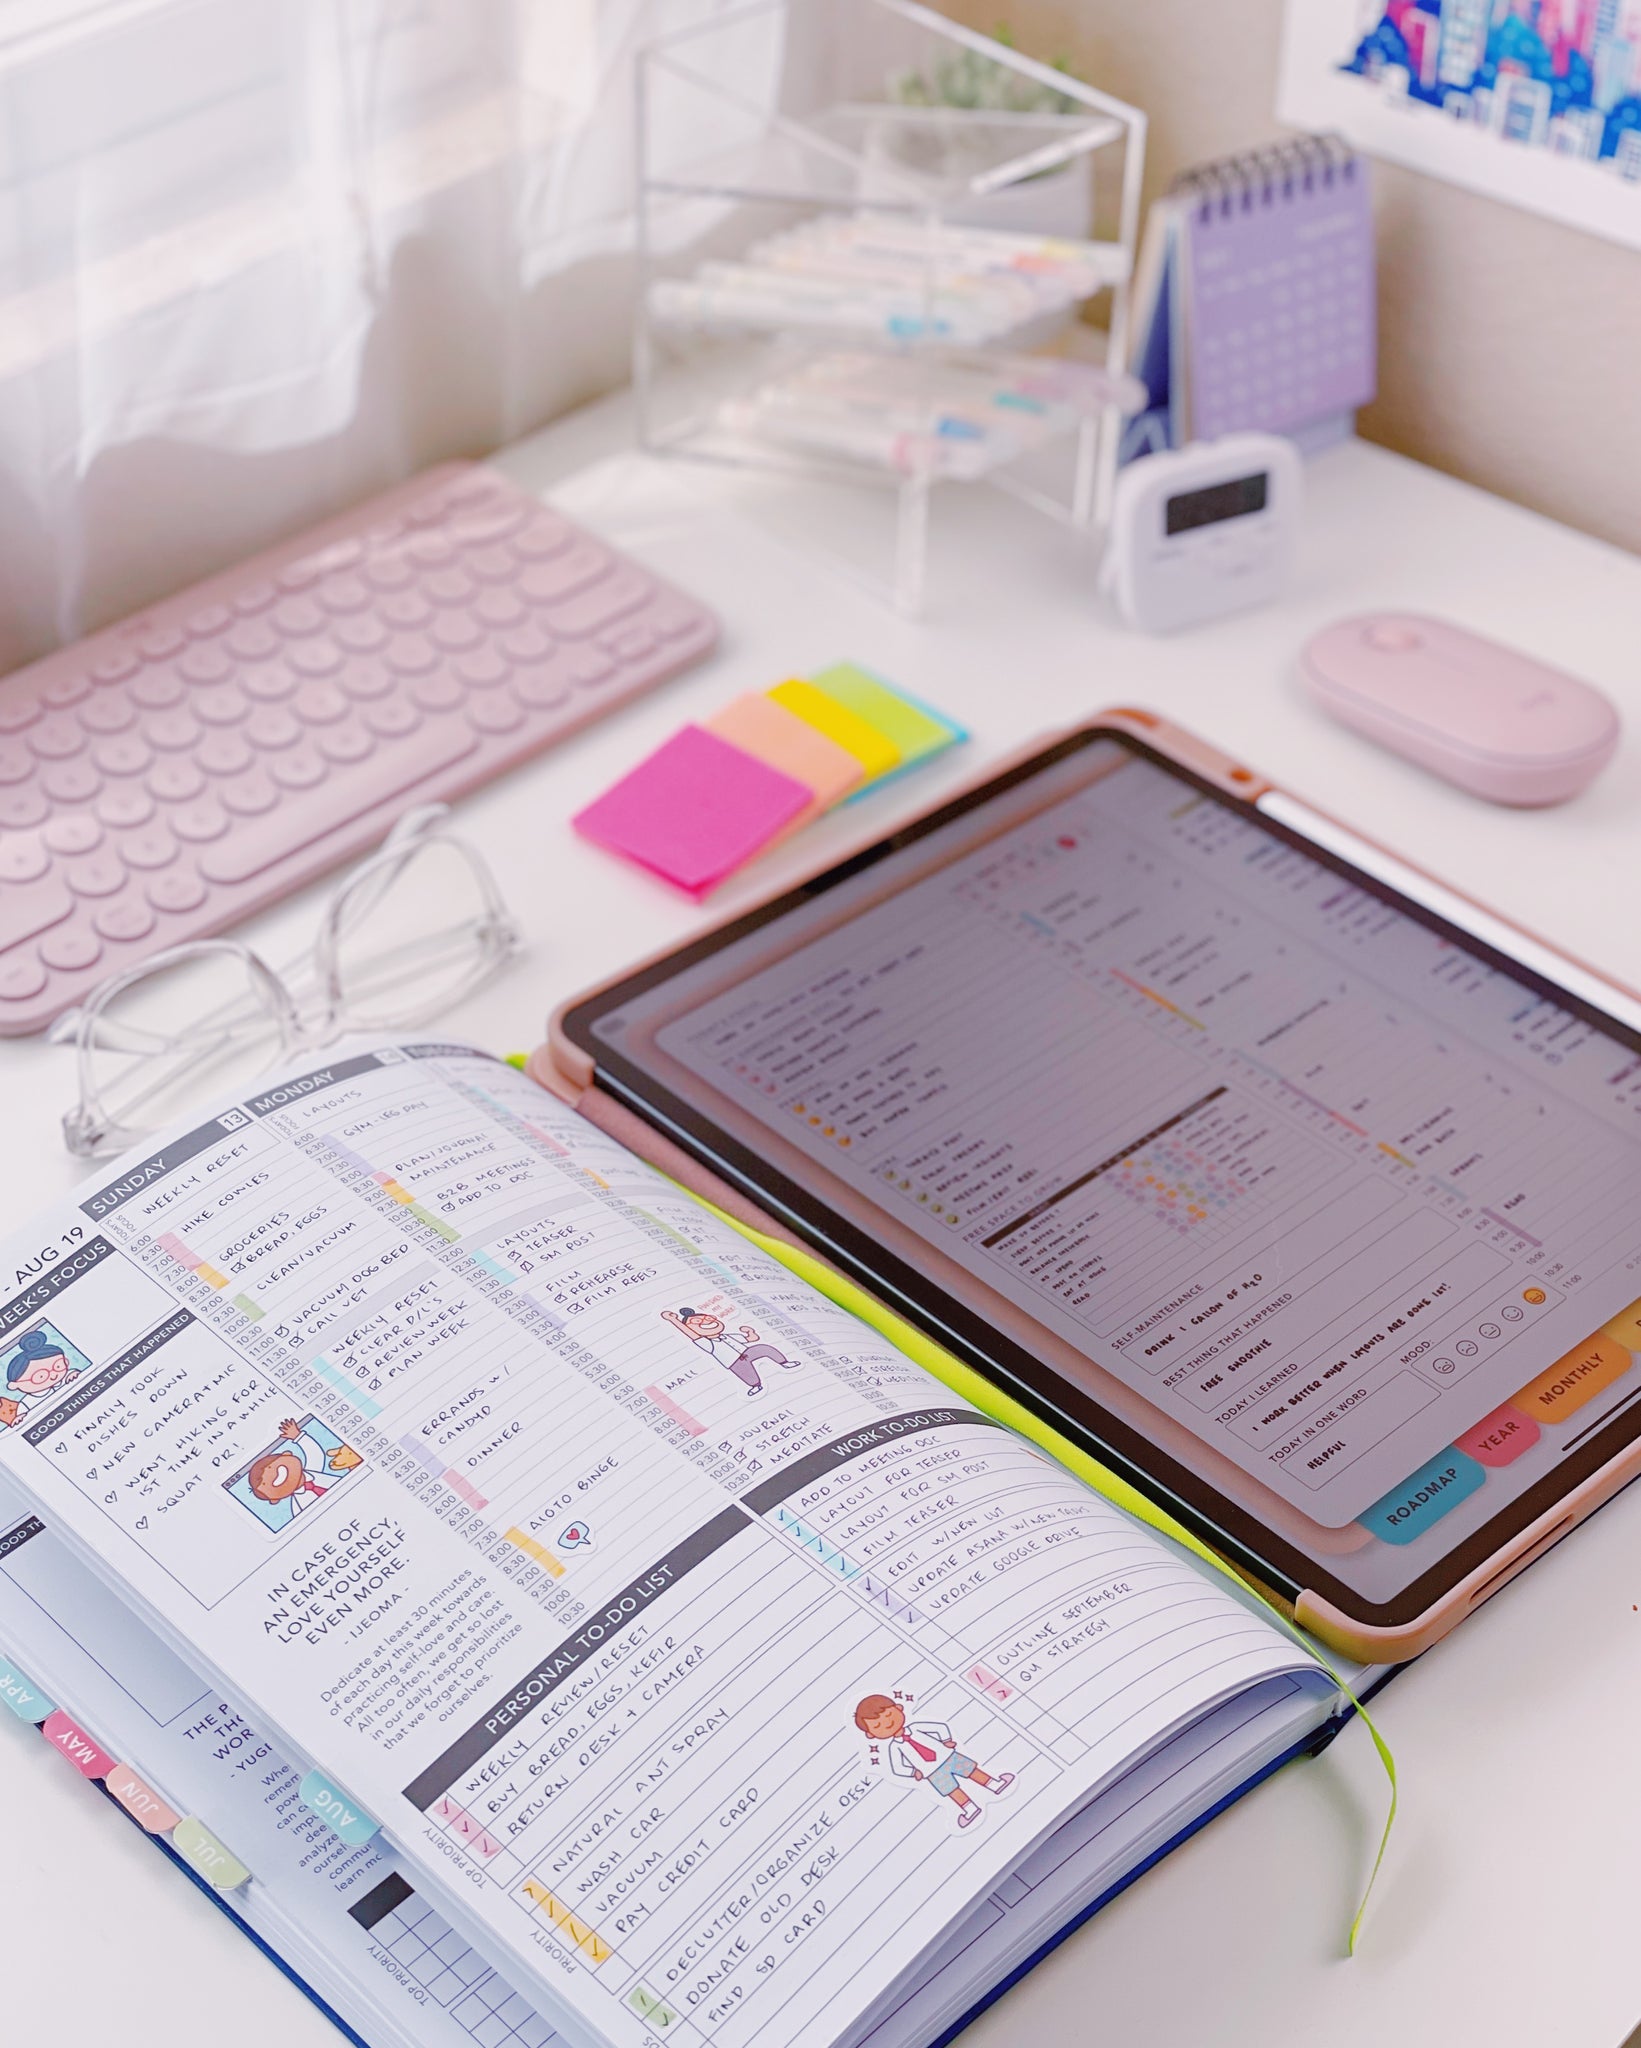 A digital and paper planner laying on a desk